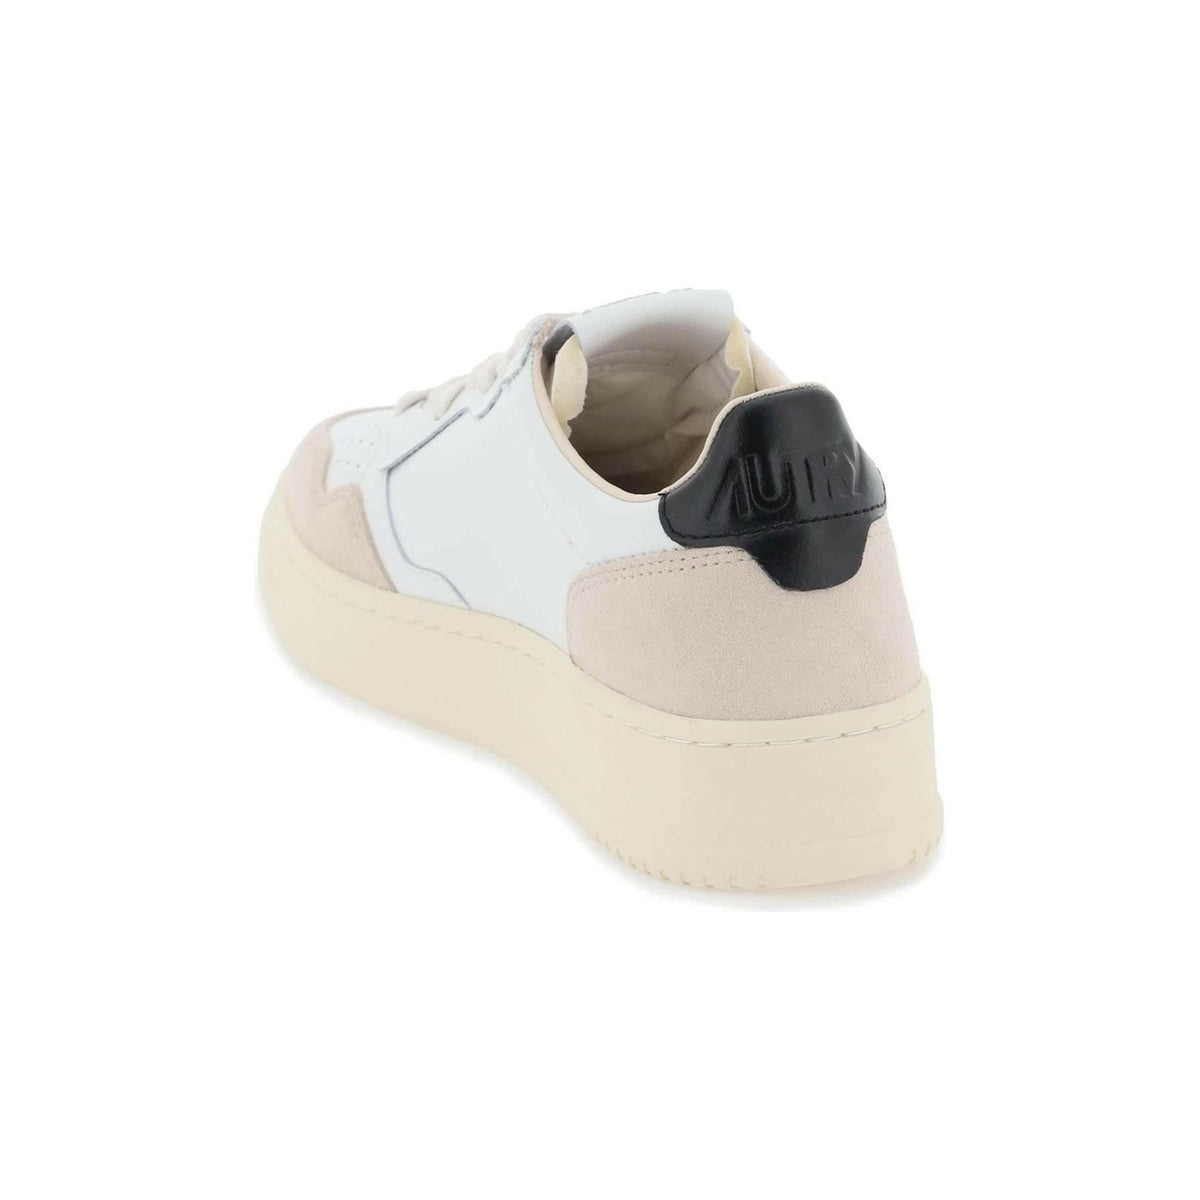 AUTRY - White and Black Leather Medalist Low Sneakers - JOHN JULIA